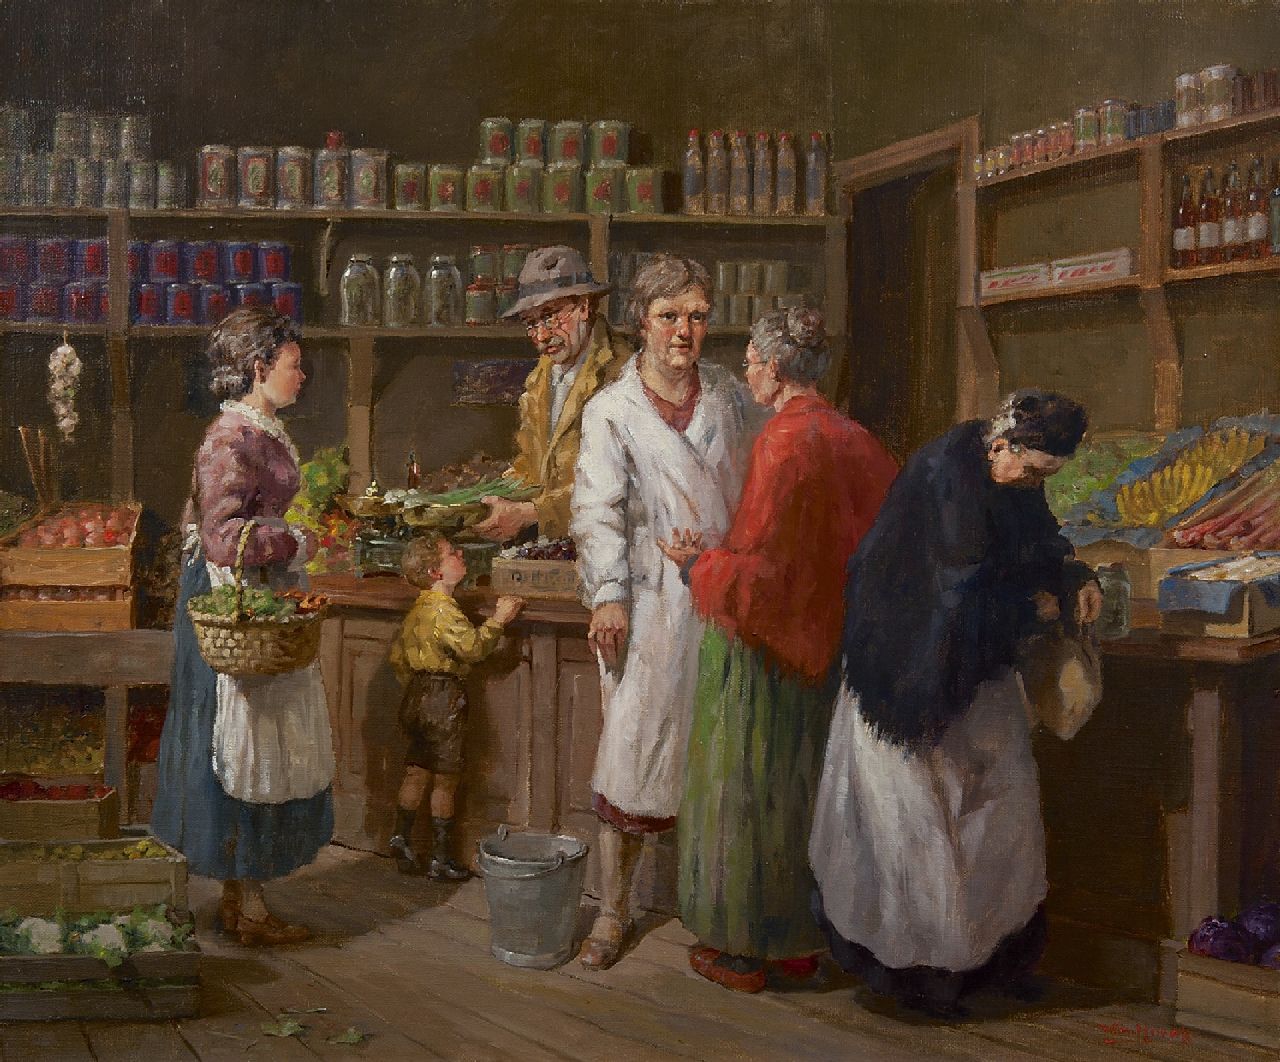 Heinecke W.H.  | Wilhelmus Hendrikus 'Wim' Heinecke | Paintings offered for sale | At the greengrocer, oil on canvas 50.0 x 60.0 cm, signed l.r.